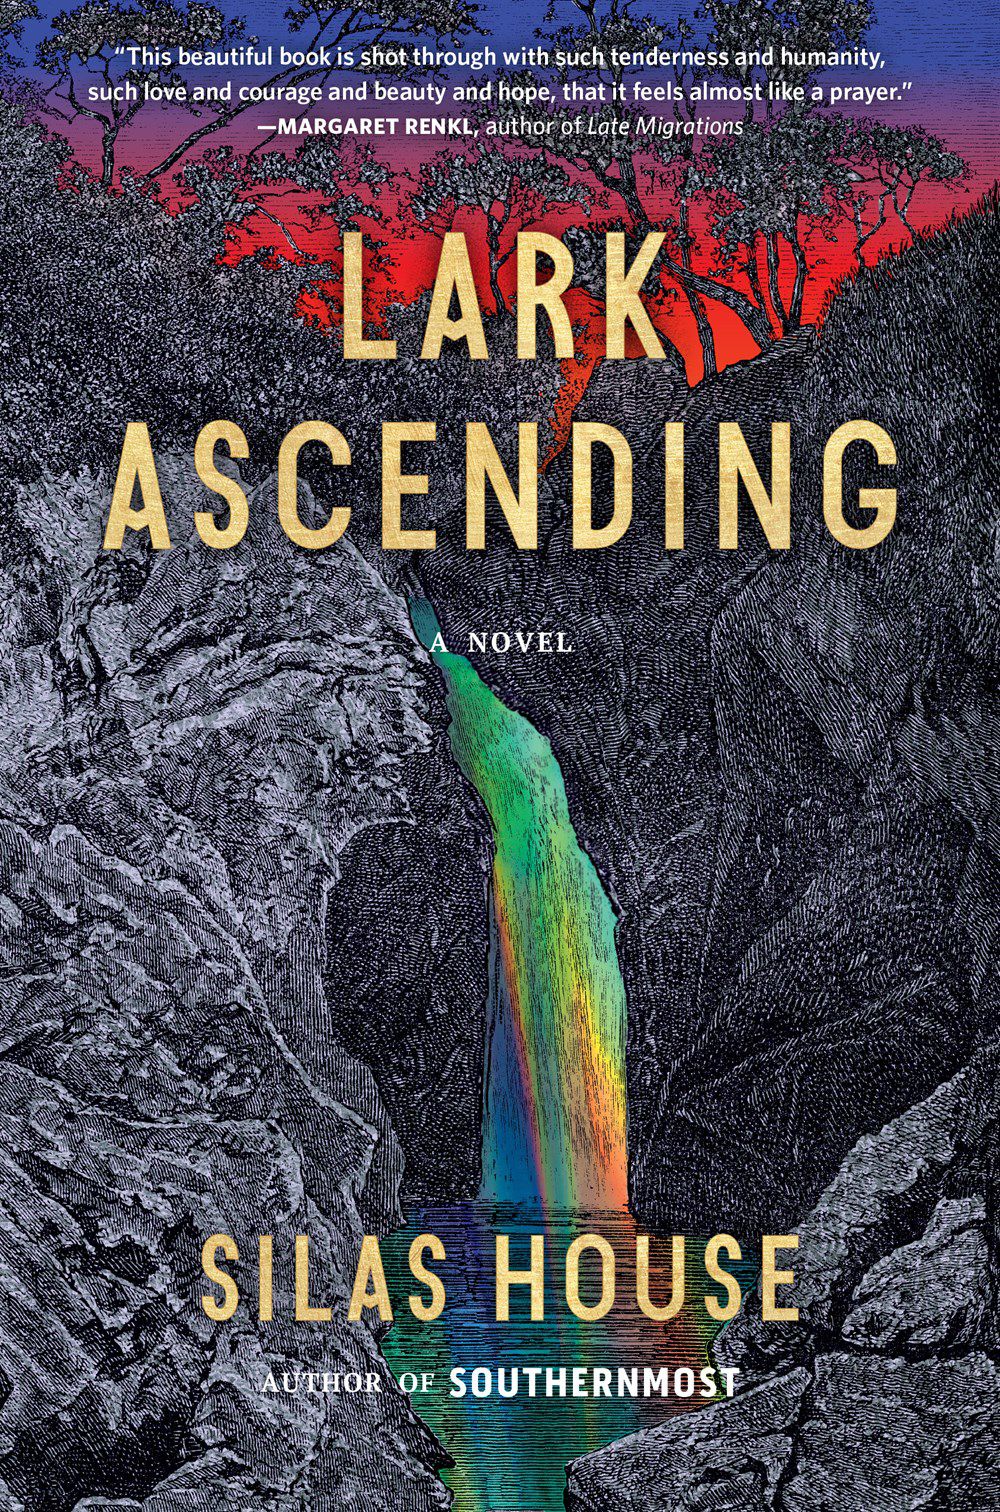 Cover image of Lark Ascending by Silas House, featuring a rainbow-colored waterfall